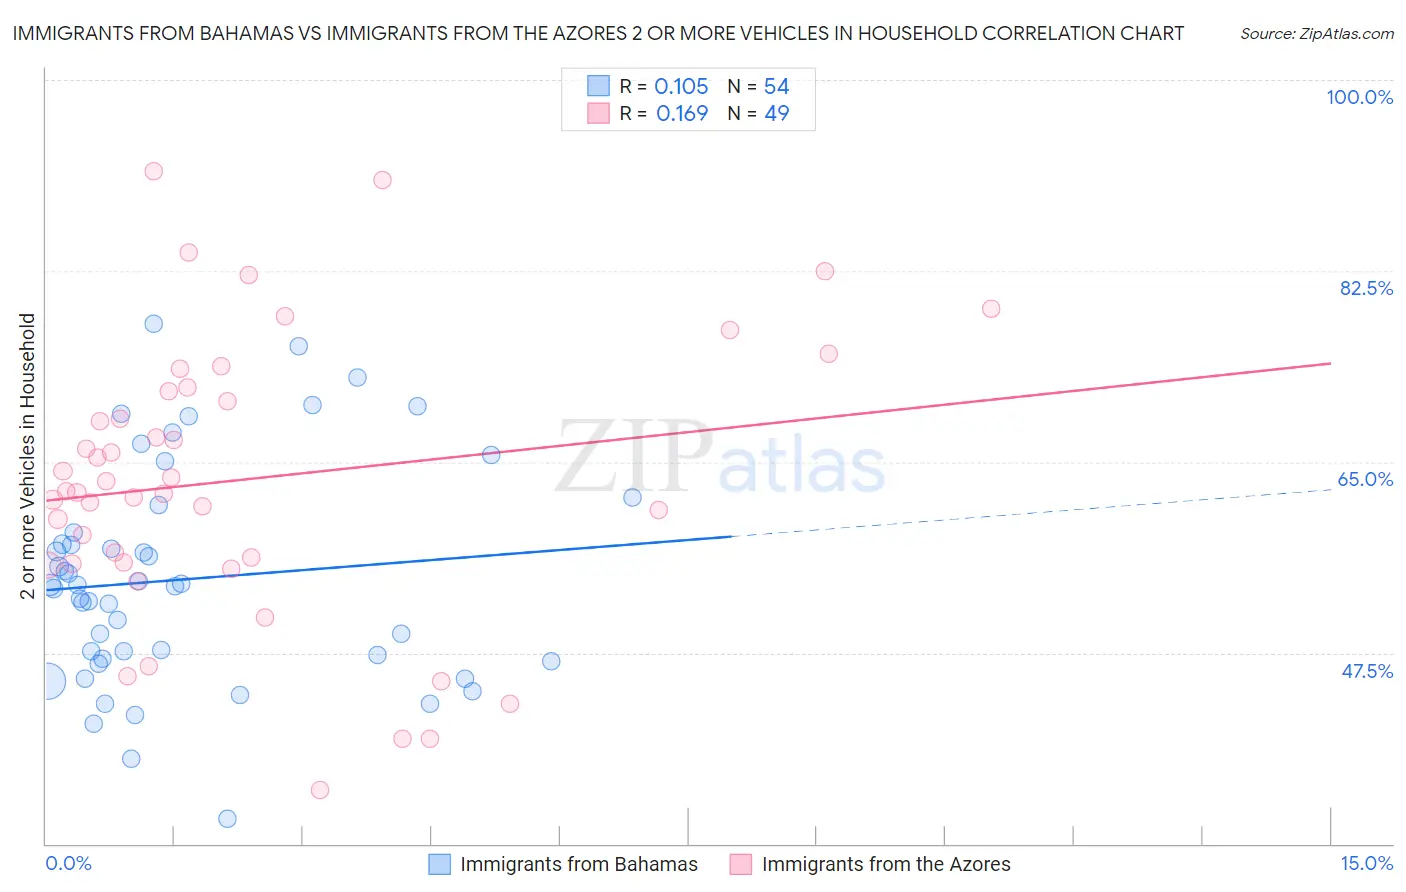 Immigrants from Bahamas vs Immigrants from the Azores 2 or more Vehicles in Household